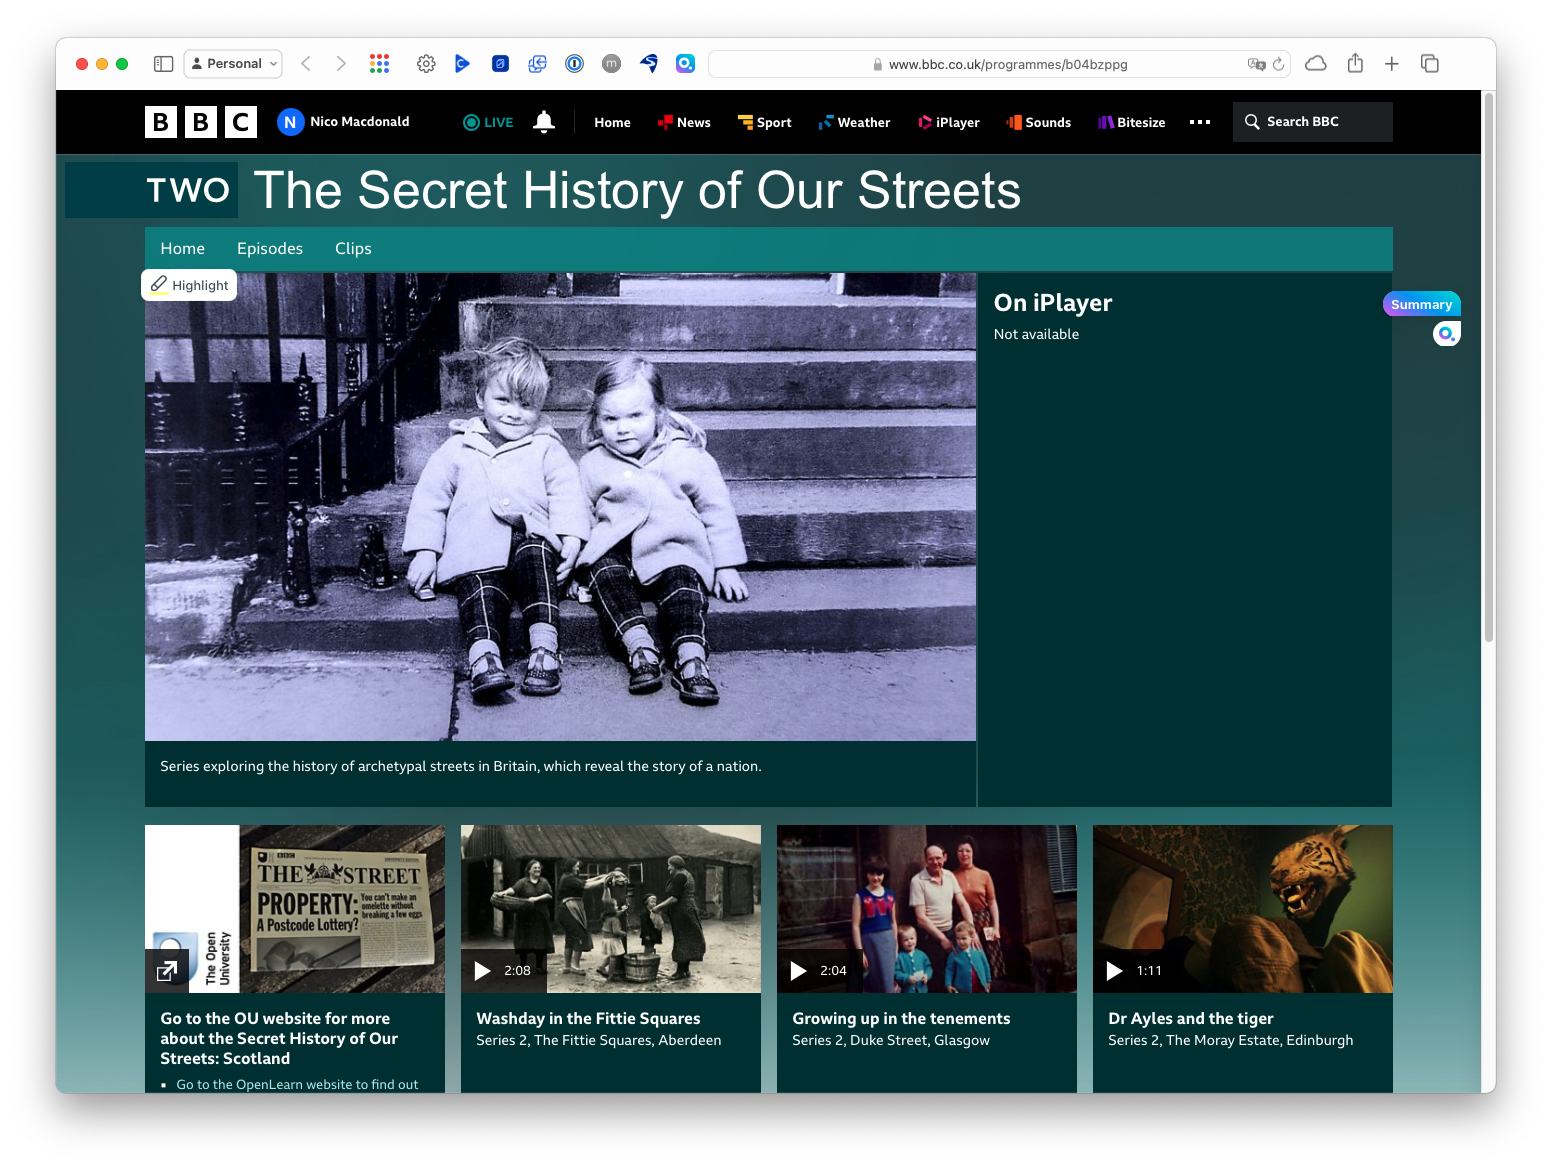 BBC The Secret History of Our Streets